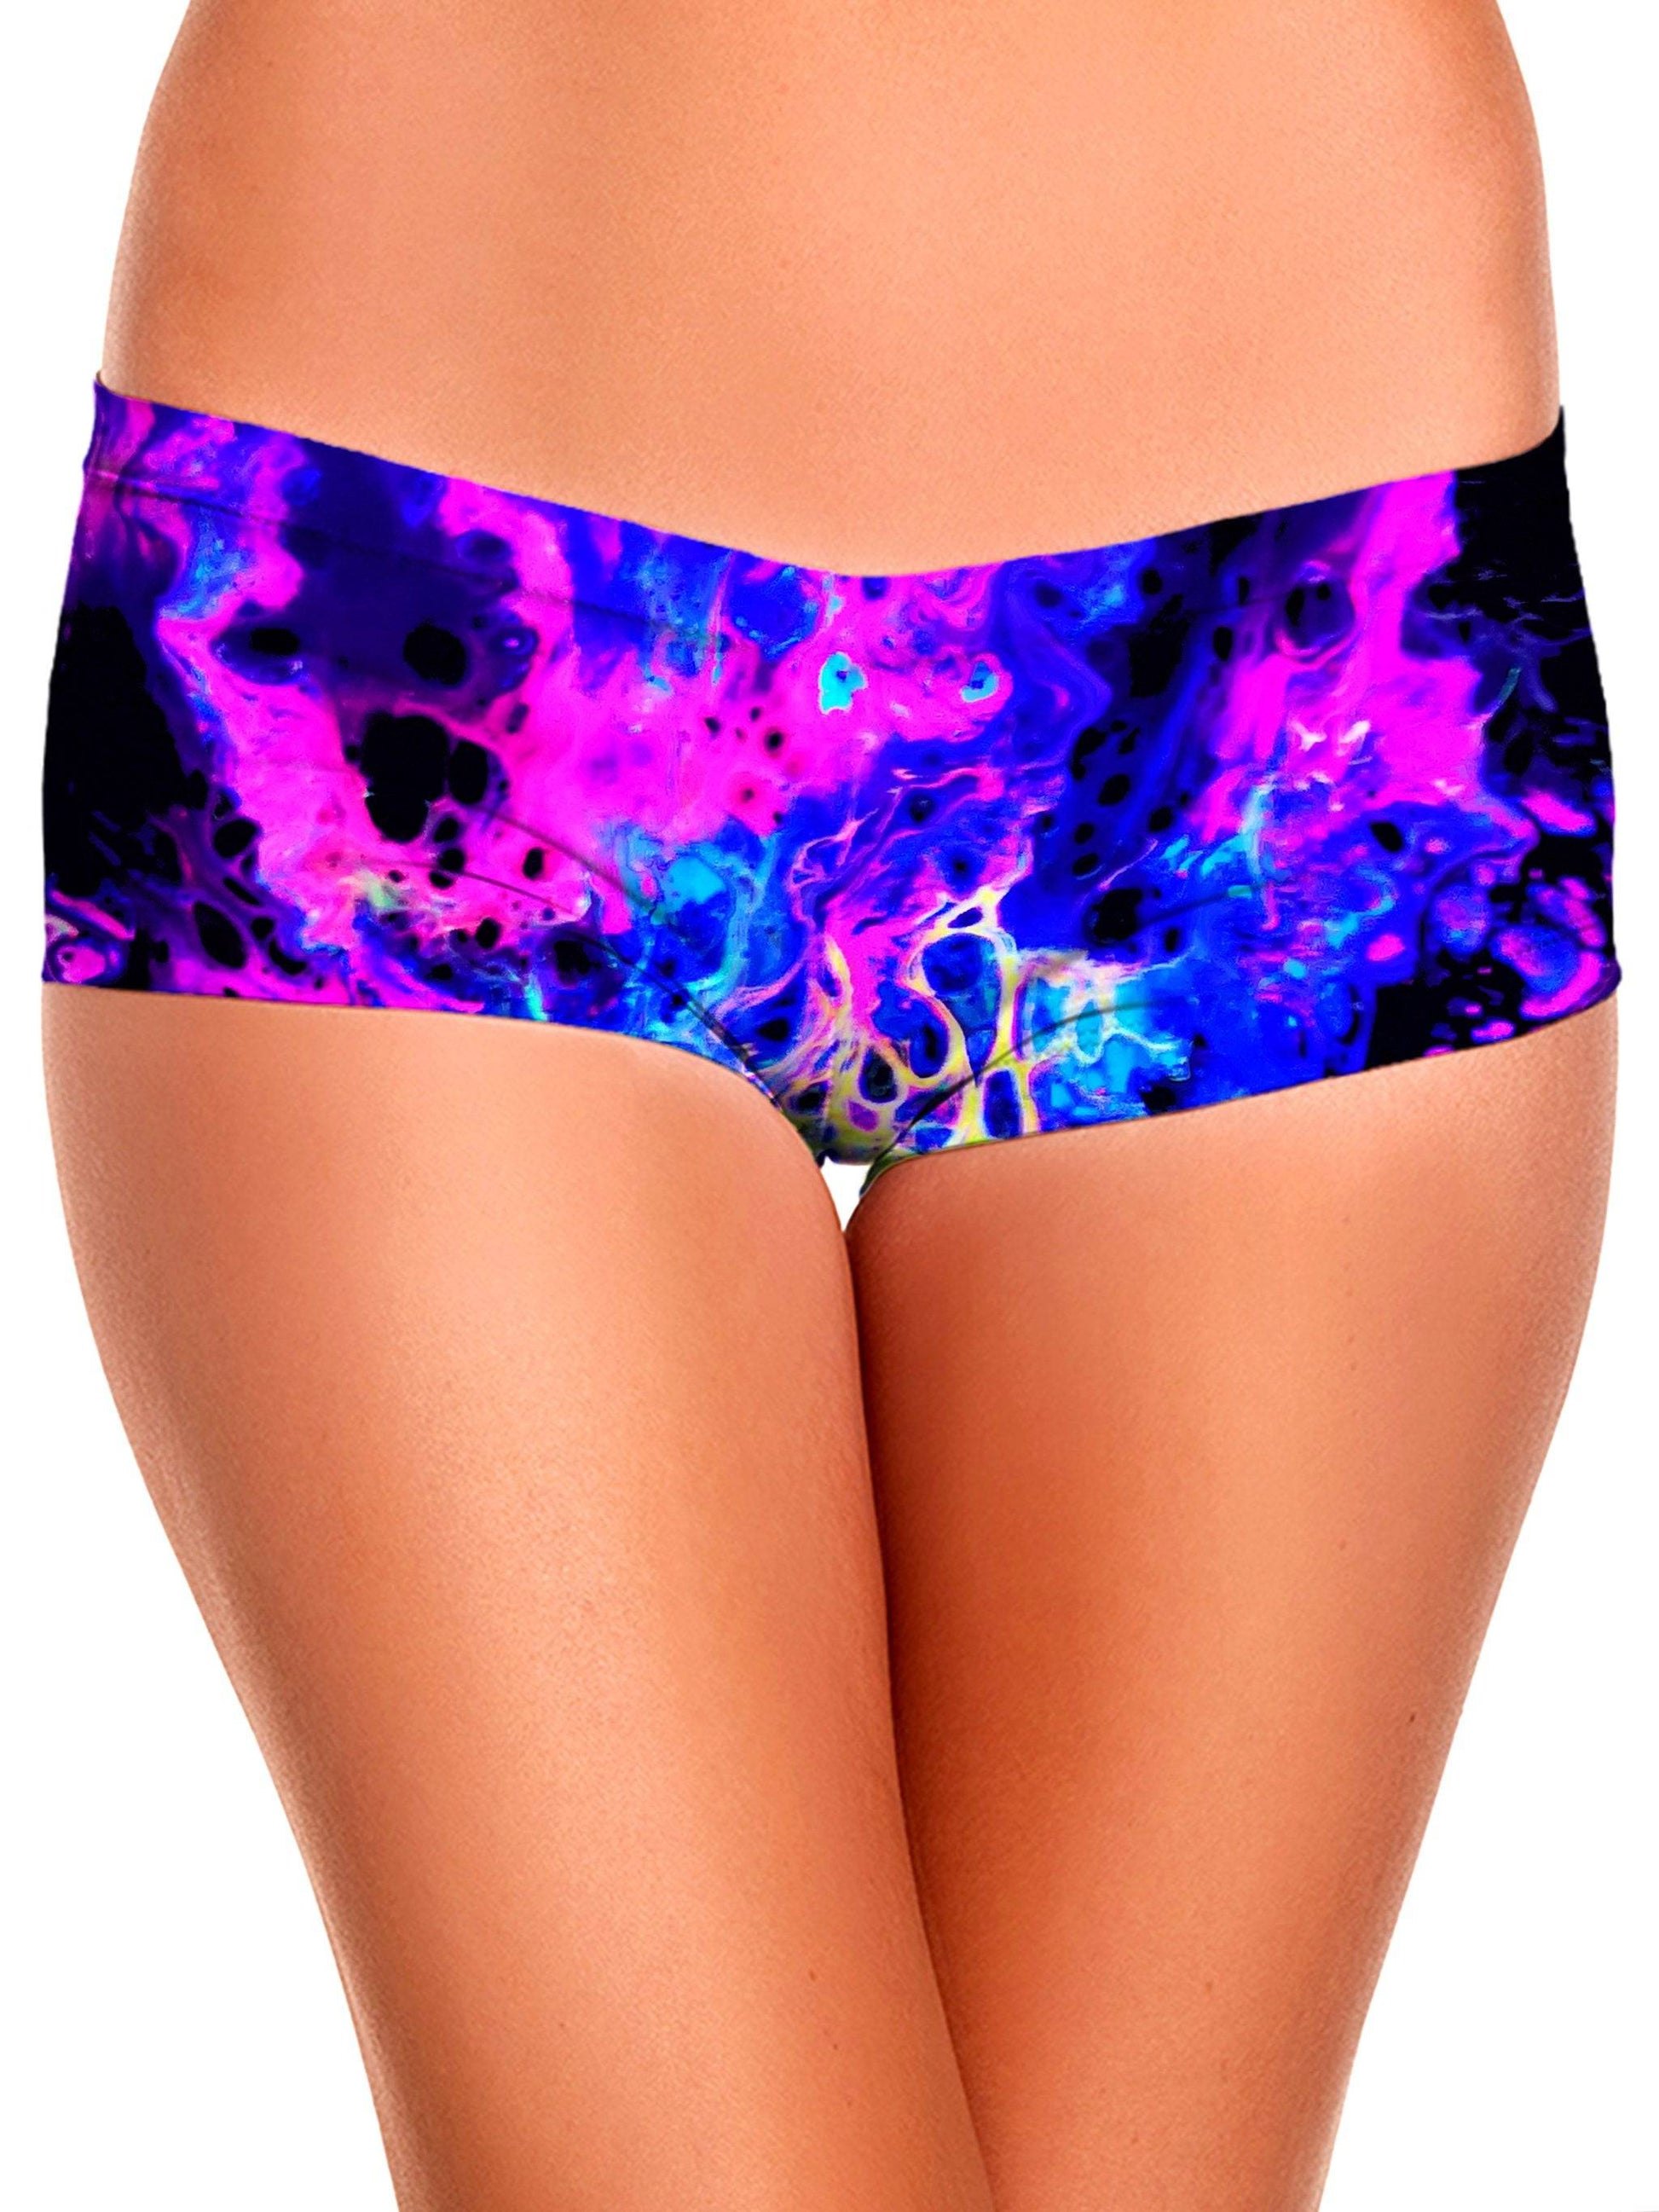 Cosmic Splatter Booty Shorts, Psychedelic Pourhouse, | iEDM